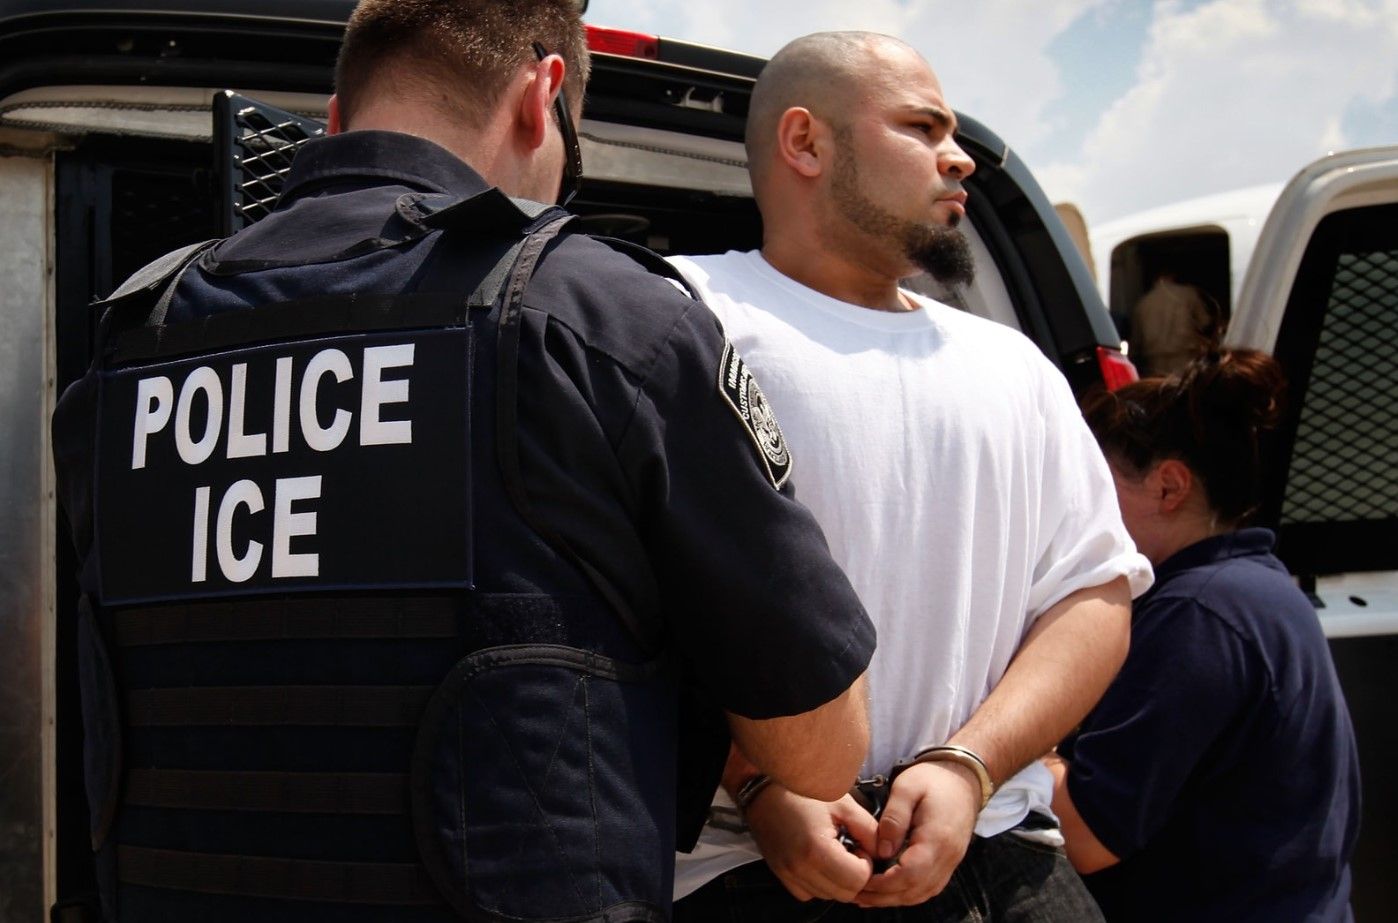 Illinois' law ending immigration detention hits snag